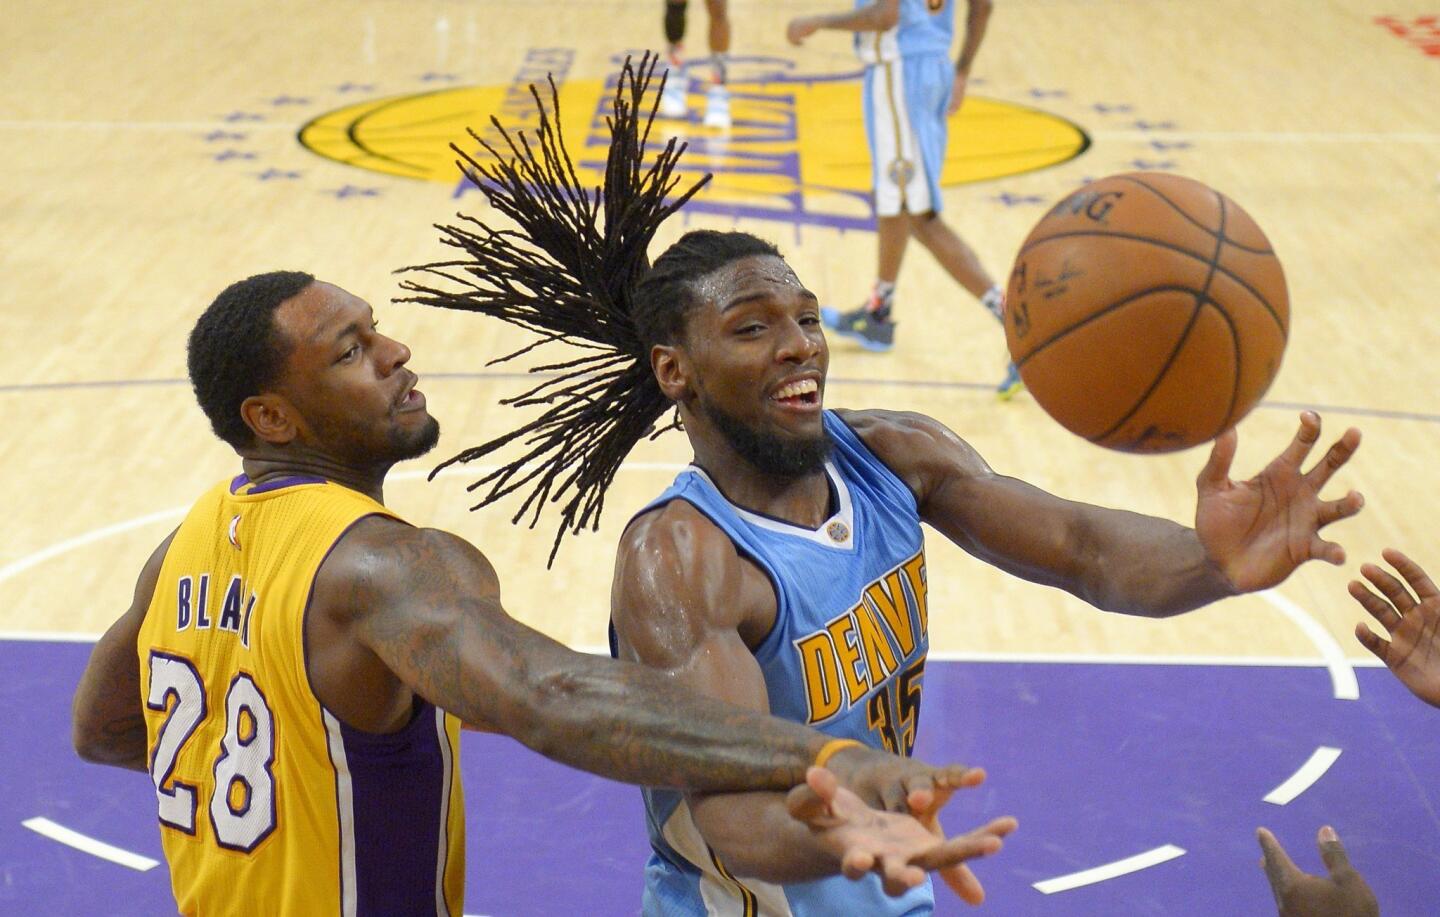 Los Angeles Lakers center Tarik Black, left, and Denver Nuggets forward Kenneth Faried reach for a loose ball during the second half of an NBA basketball game Tuesday, Nov. 3, 2015, in Los Angeles. The Nuggets won 120-109. (AP Photo/Mark J. Terrill)